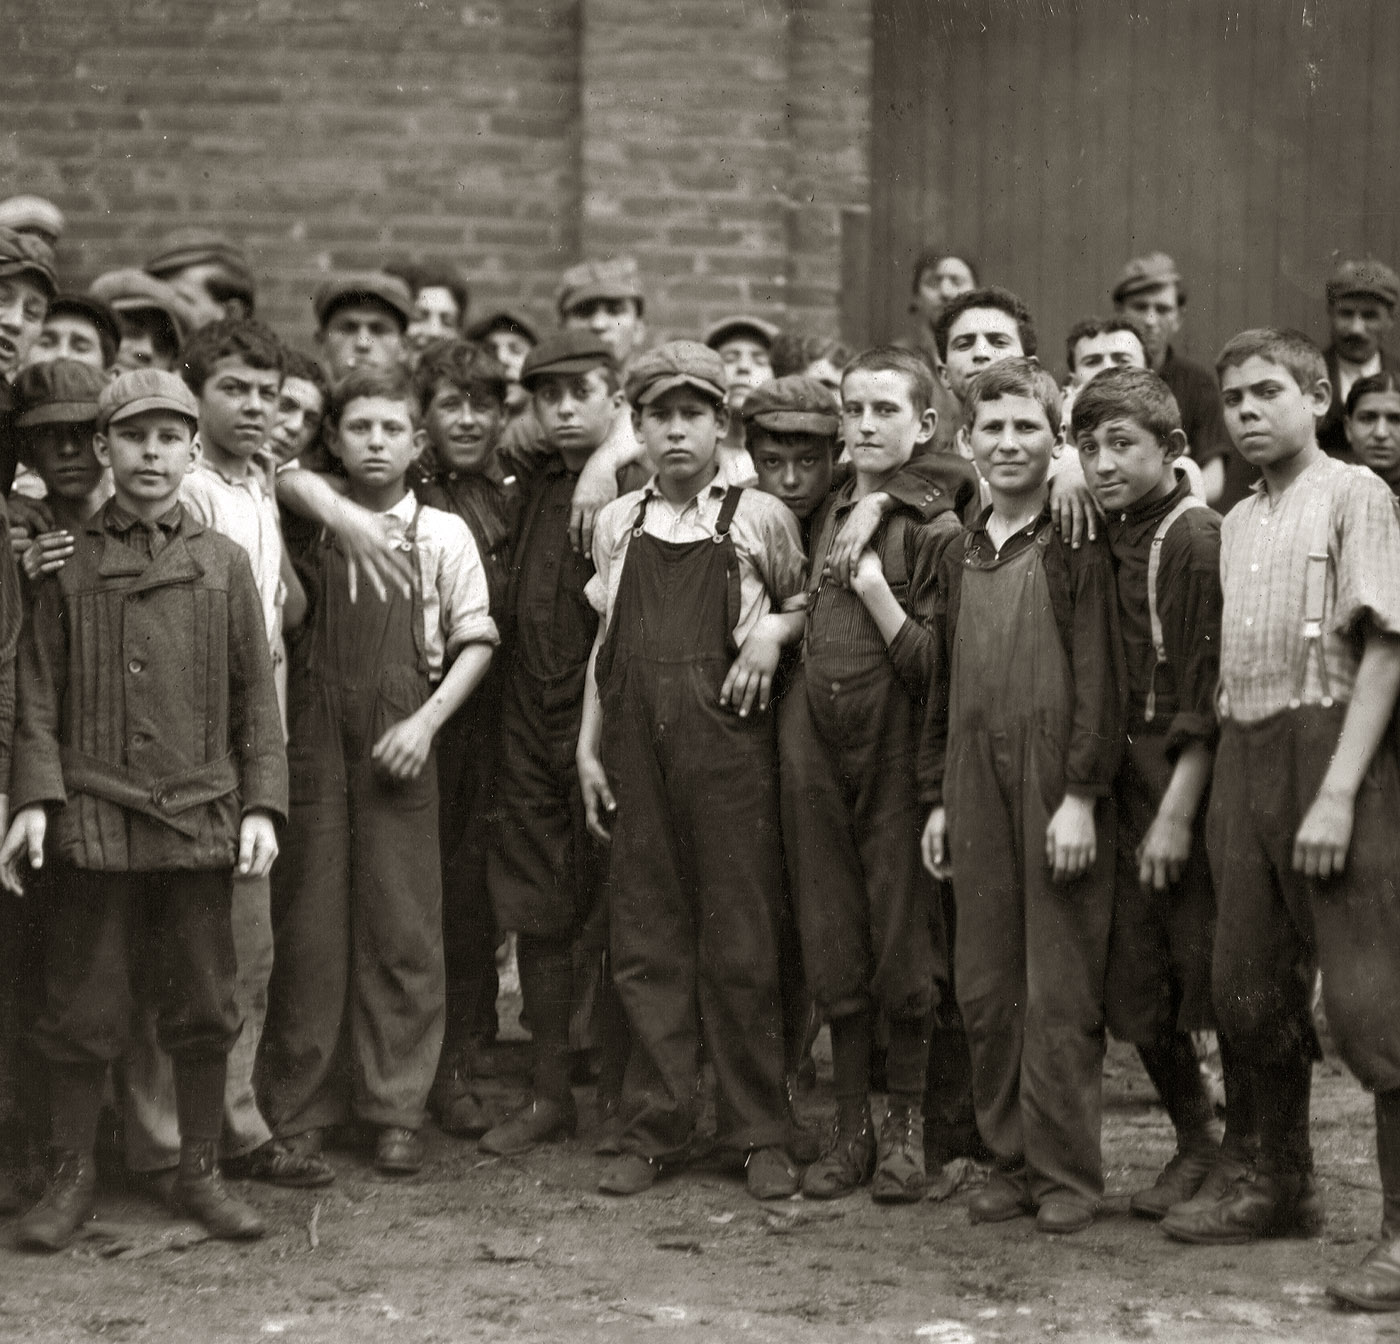 Young workers at a Lawrence, Massachusetts, manufacturing concern (fabric mill or cannery). September 1911. View full size. Photograph by Lewis Wickes Hine.